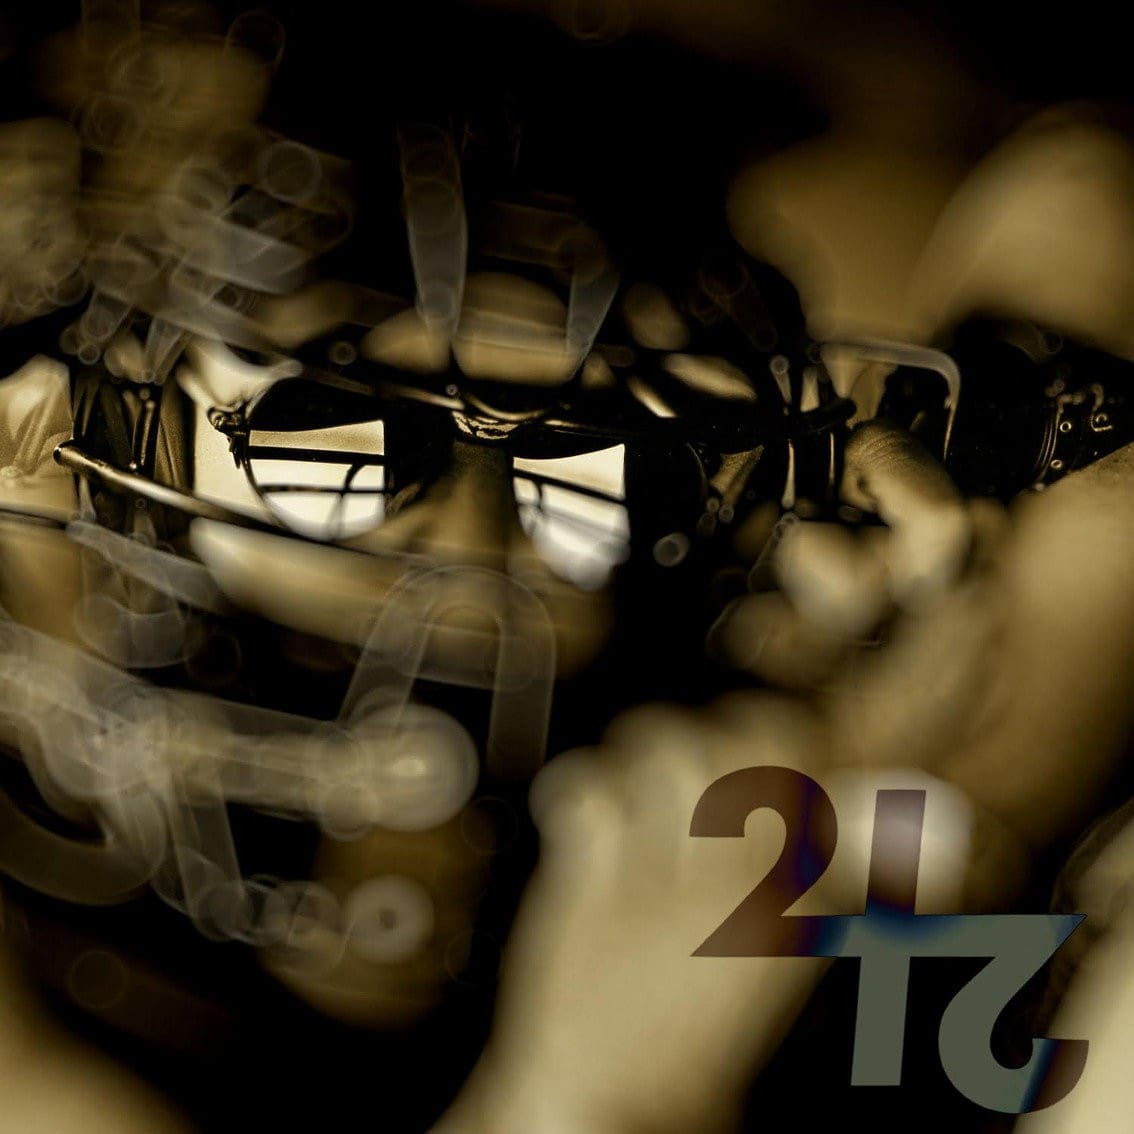 Front 242 releases free 2-track single + remix contest